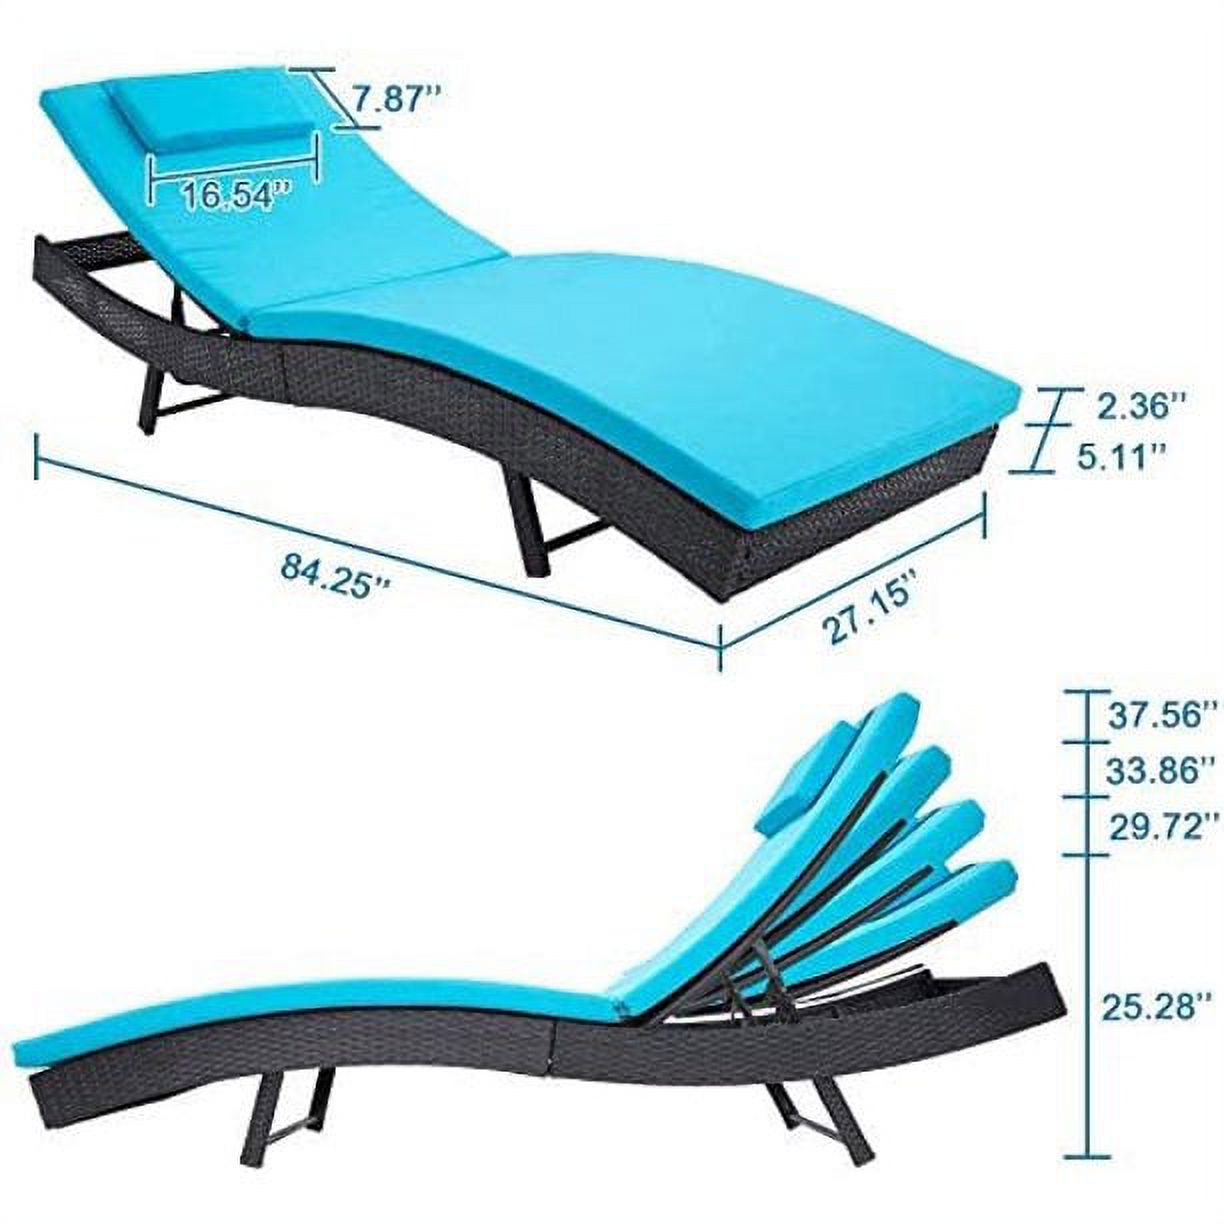 SOLAURA Patio Chaise Lounge Adjustable Black Wicker Reclining Chairs Set of 2 with Blue Cushions - image 4 of 6